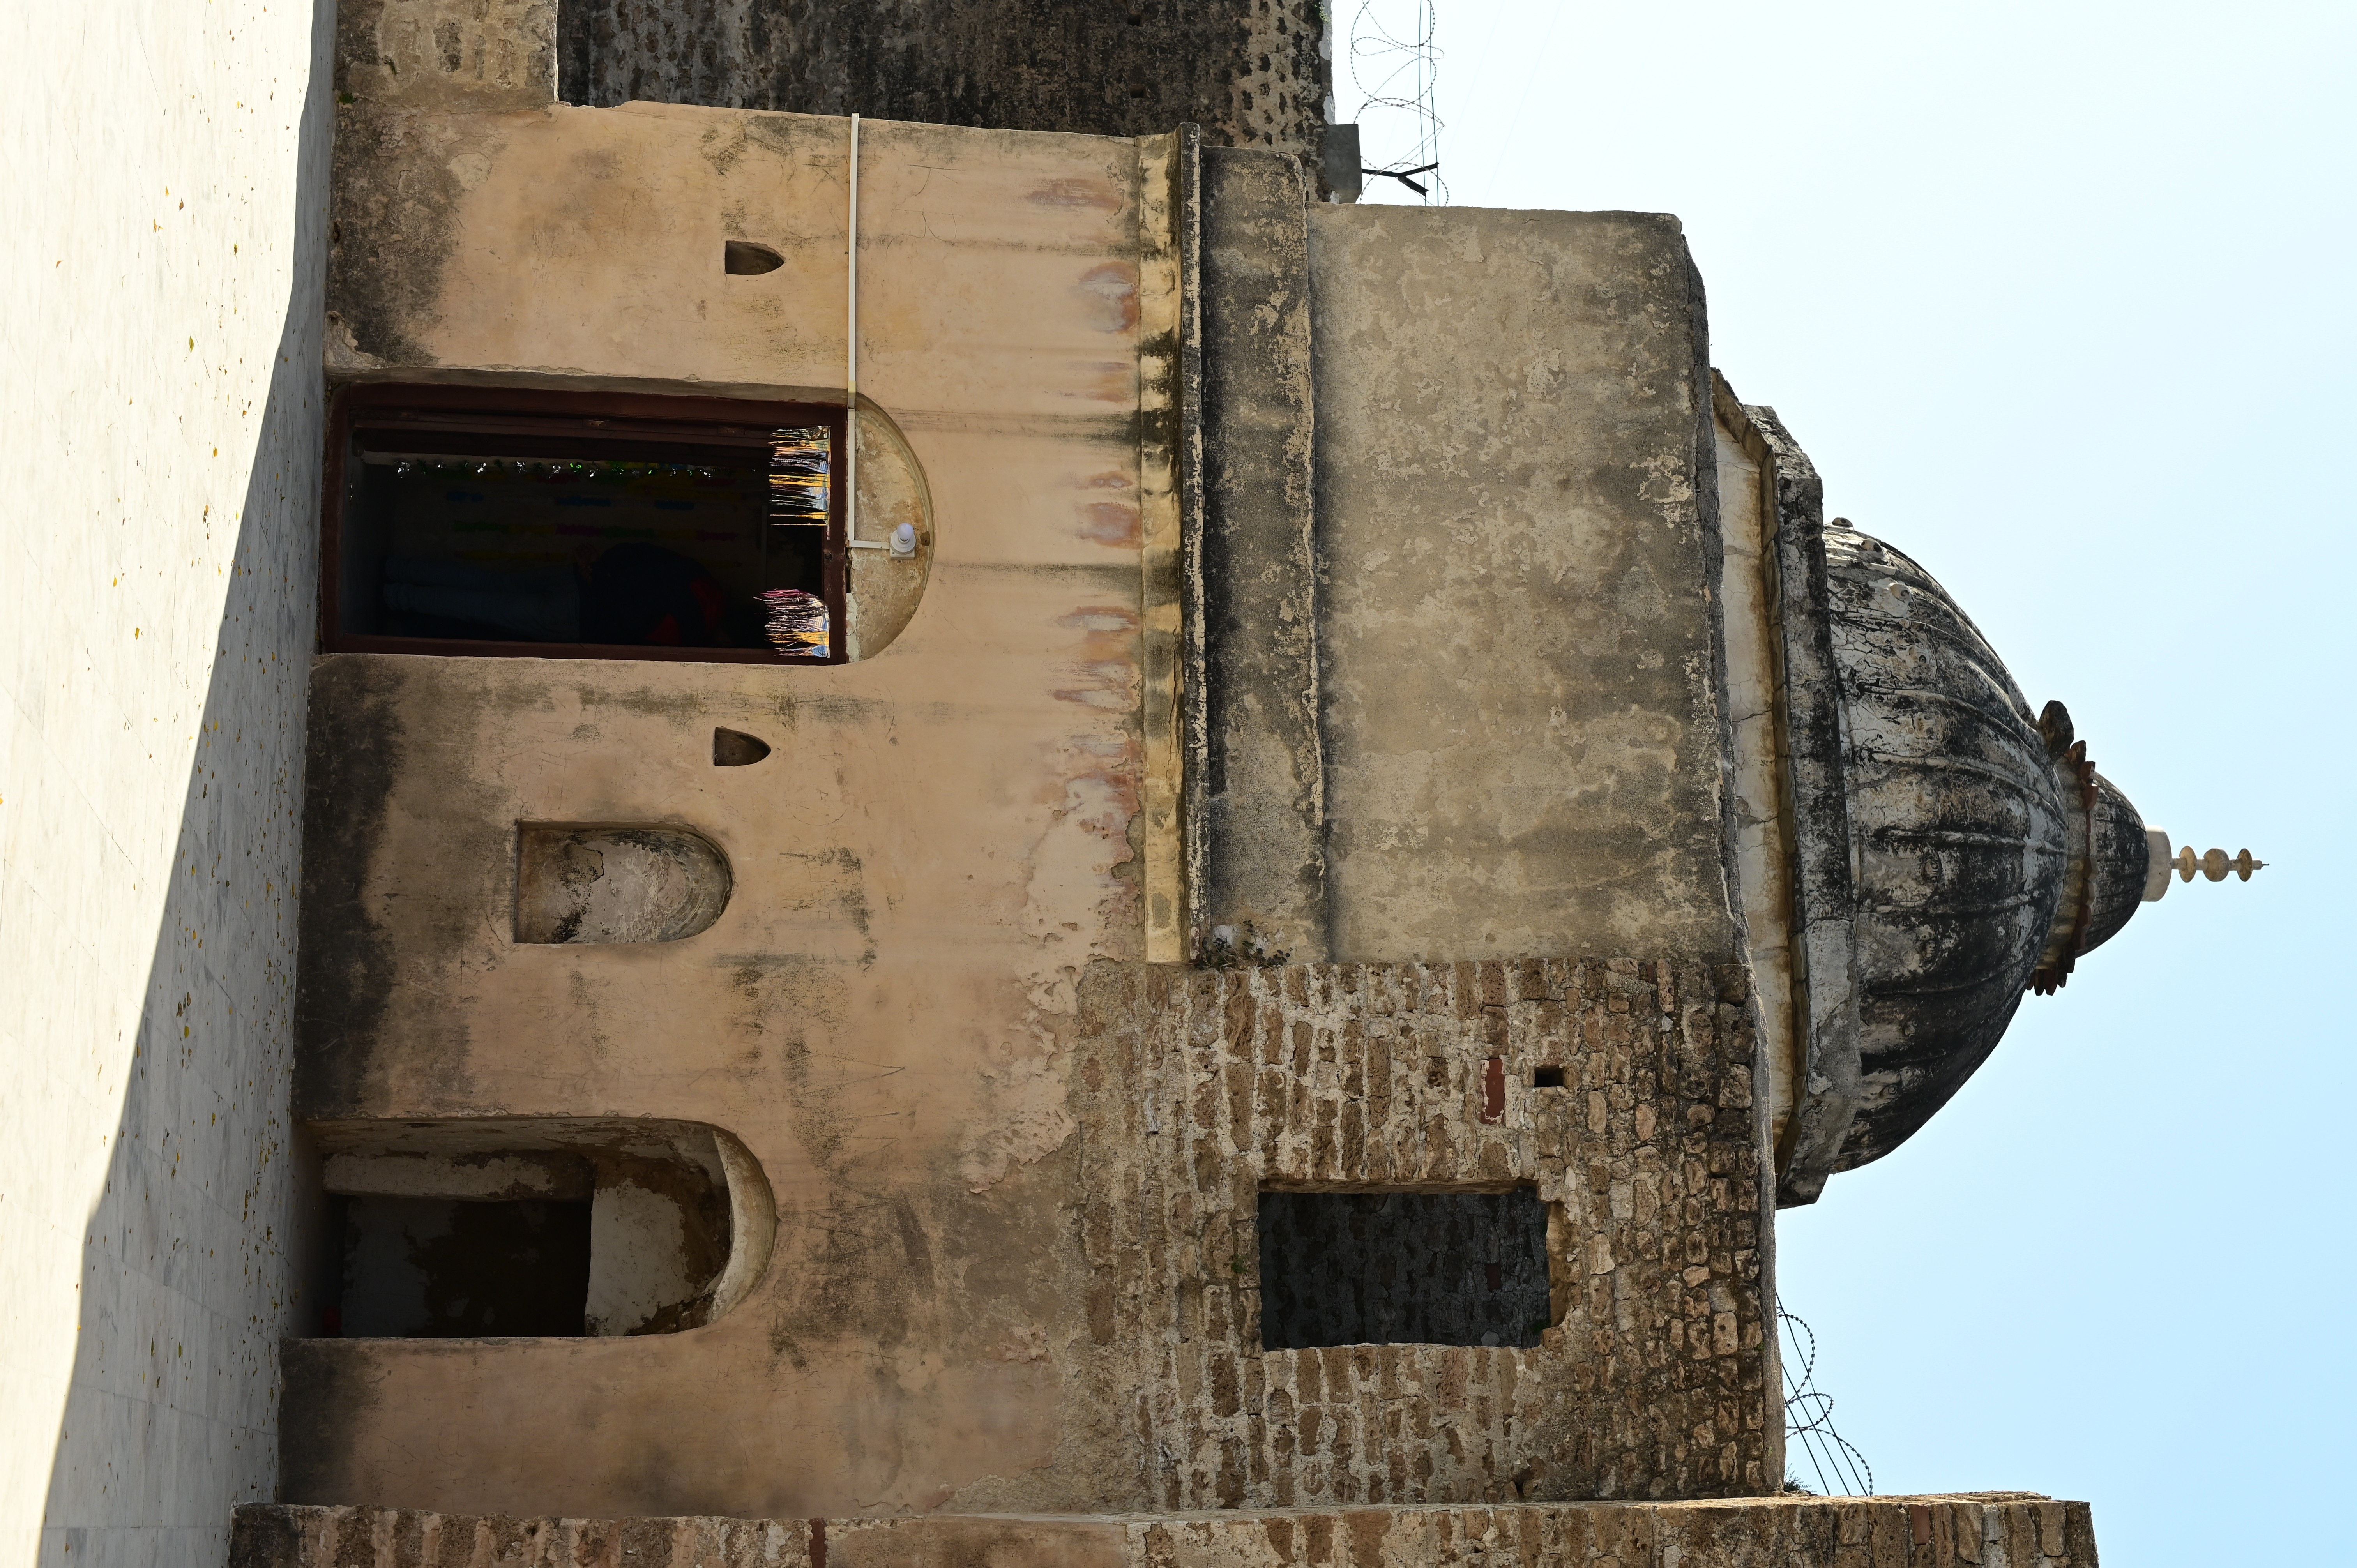 The exterior view of crumbling beauty and fading colors of Katas Raj Temples symbolizing the ancient Hindu Culture